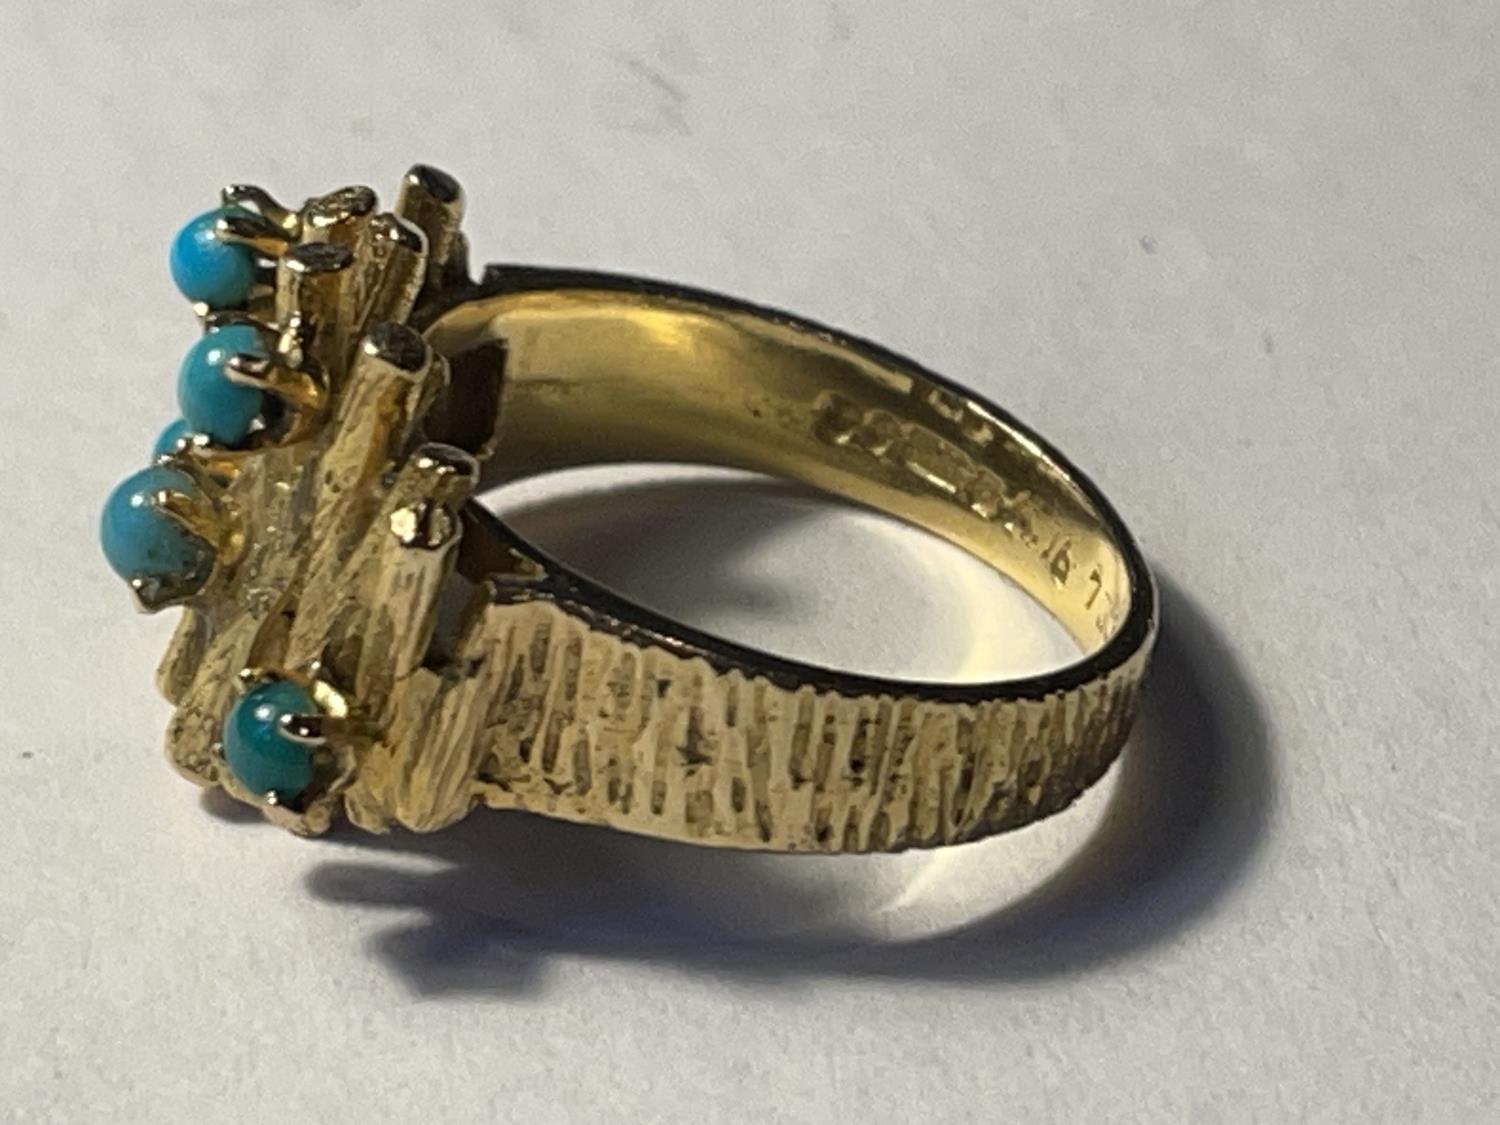 A 9CT YELLOW GOLD AND TURQUOISE STONE RING WITH BARK DESIGN SIZE L, WEIGHT 6.01 GRAMS - Image 2 of 3